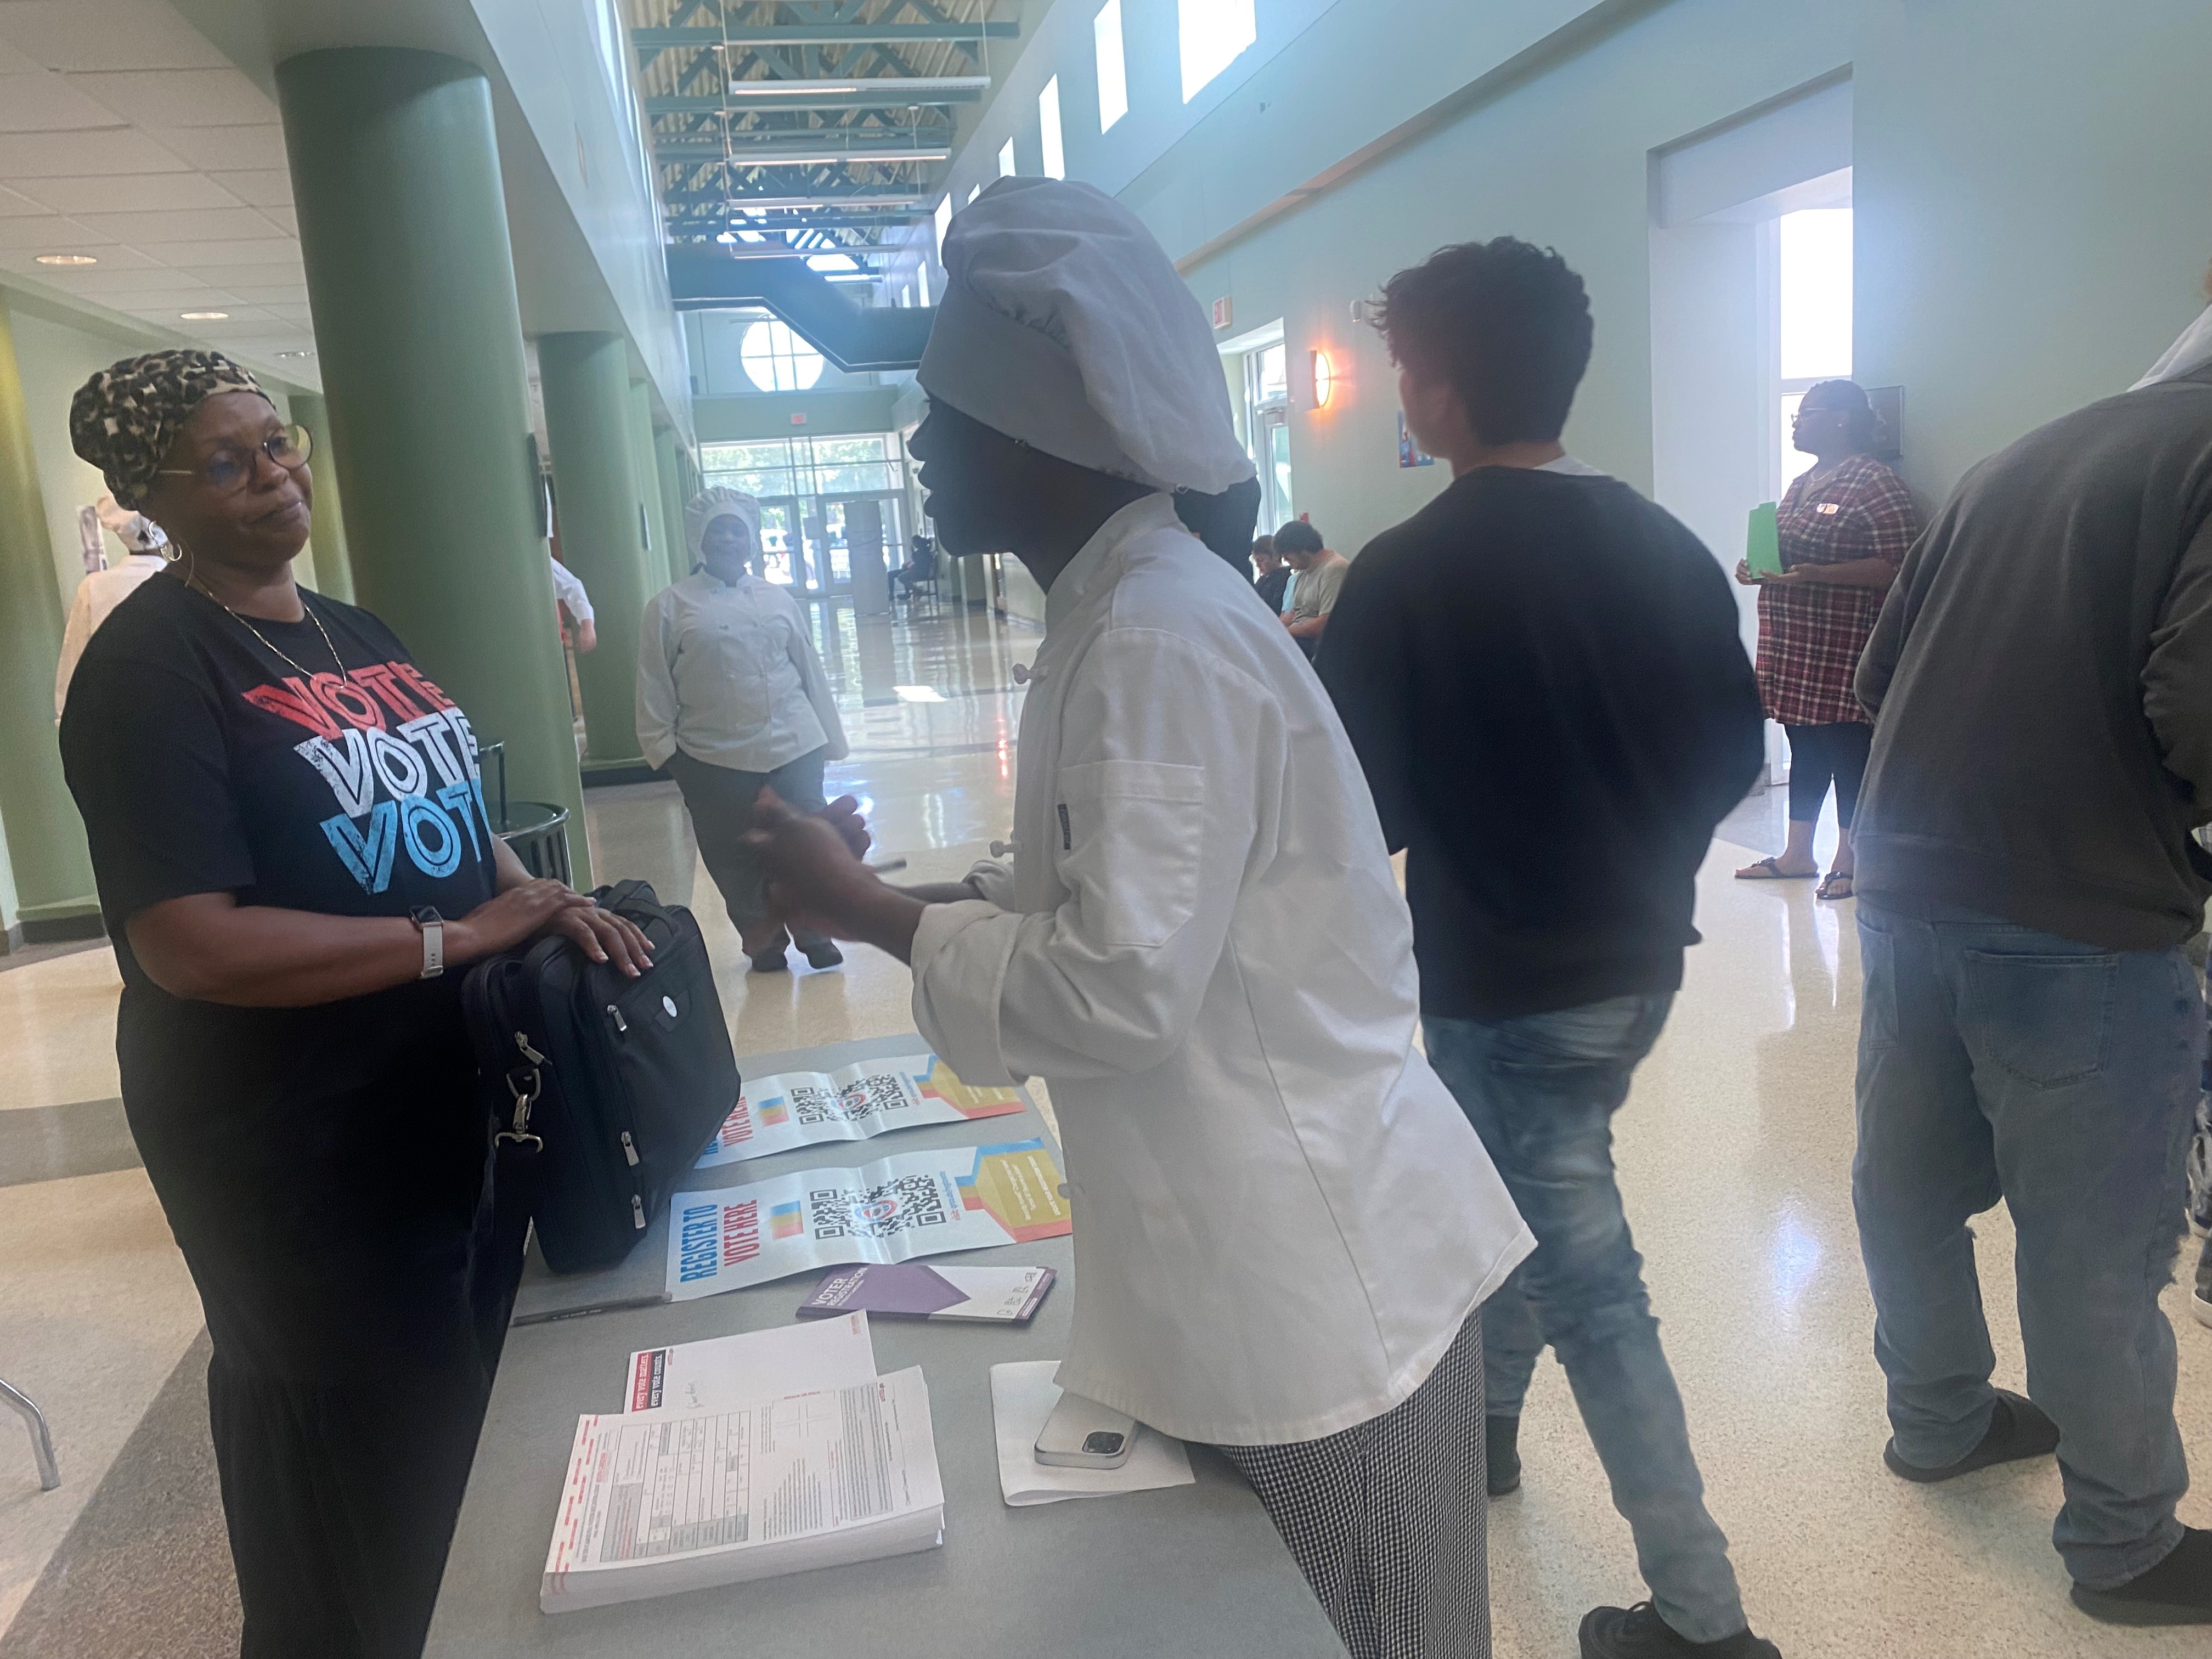 Student from FE Dubose talking to a Voter Registration representative